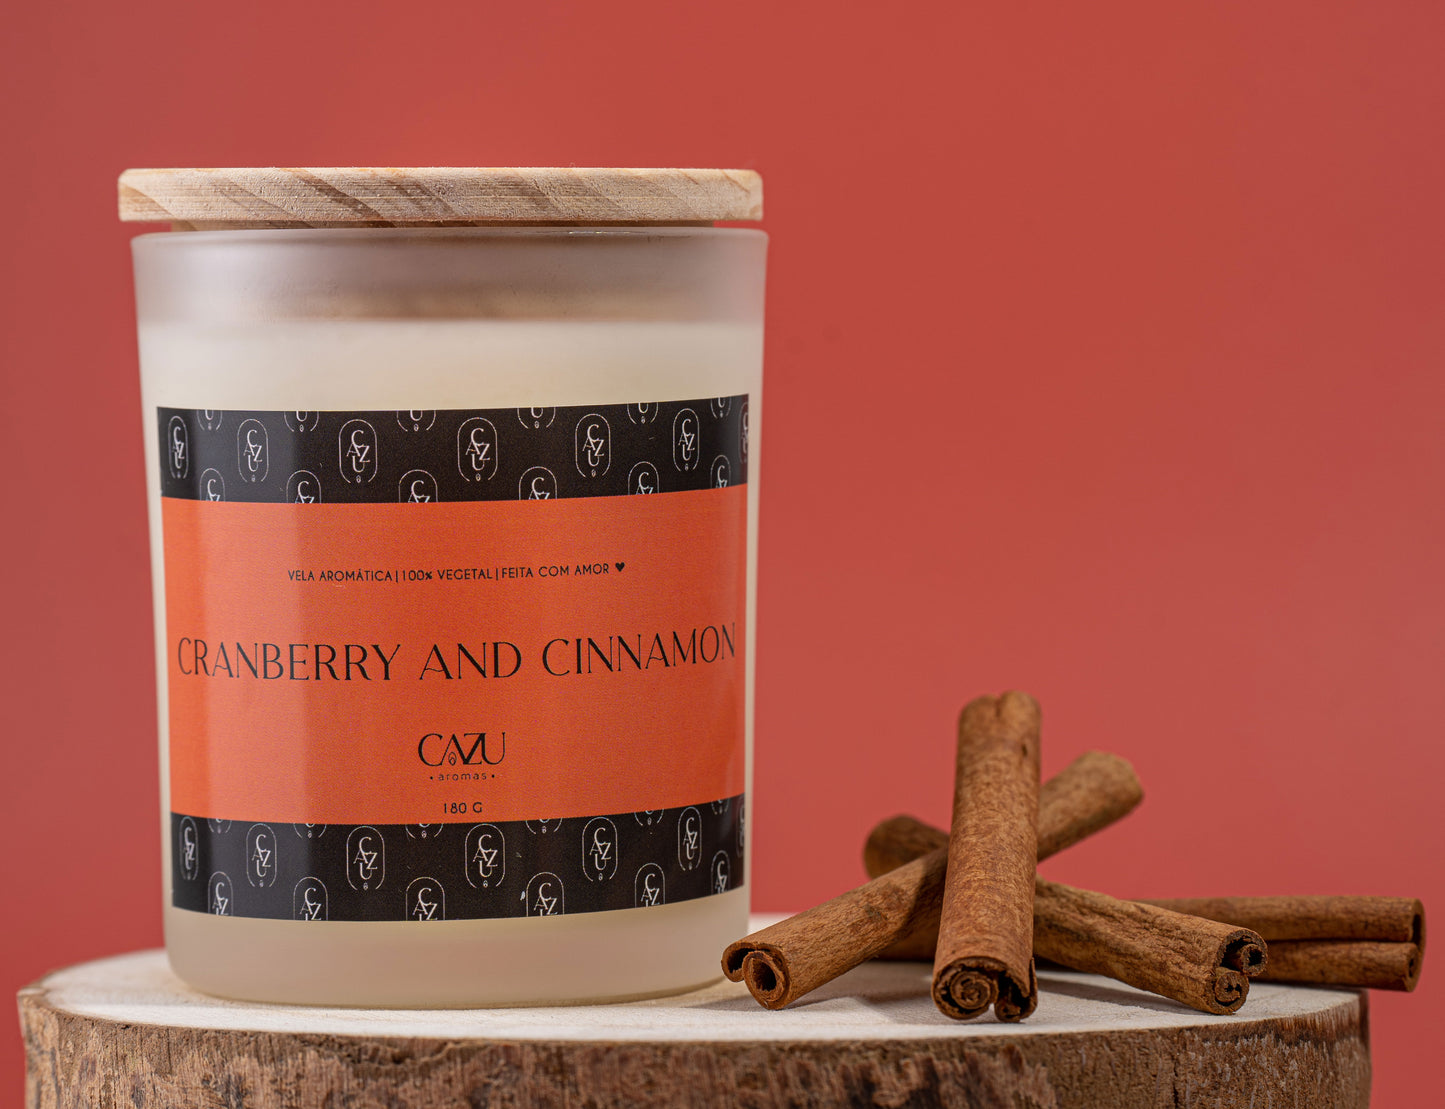 Cranberry and Cinnamon scented candle